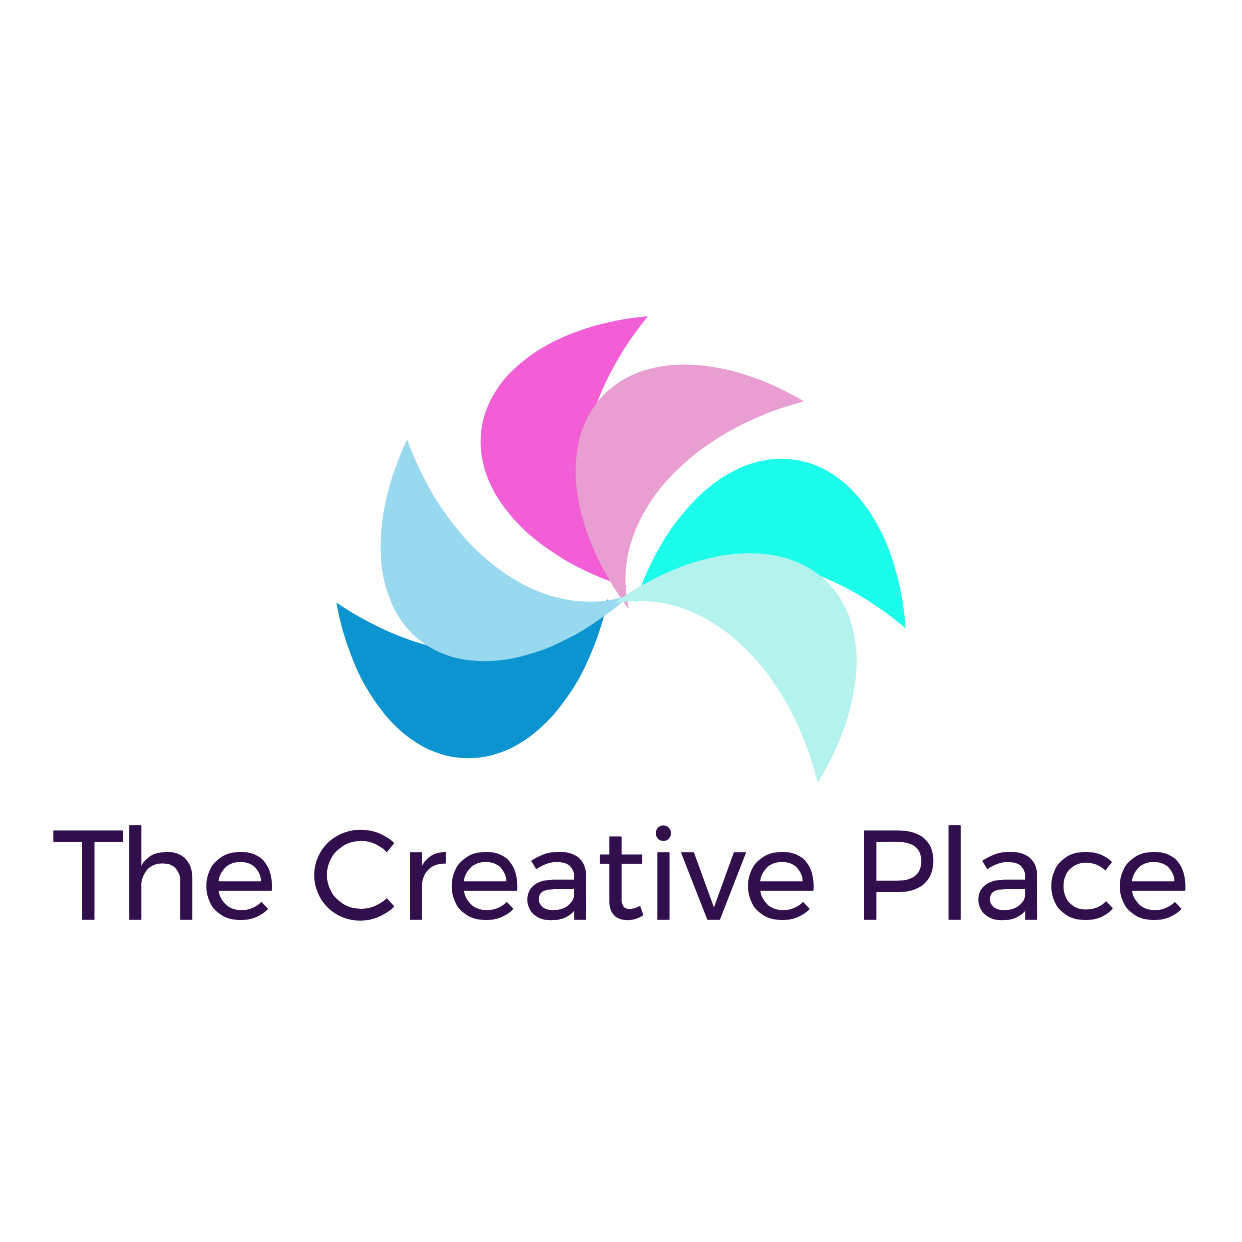 The Creative Place